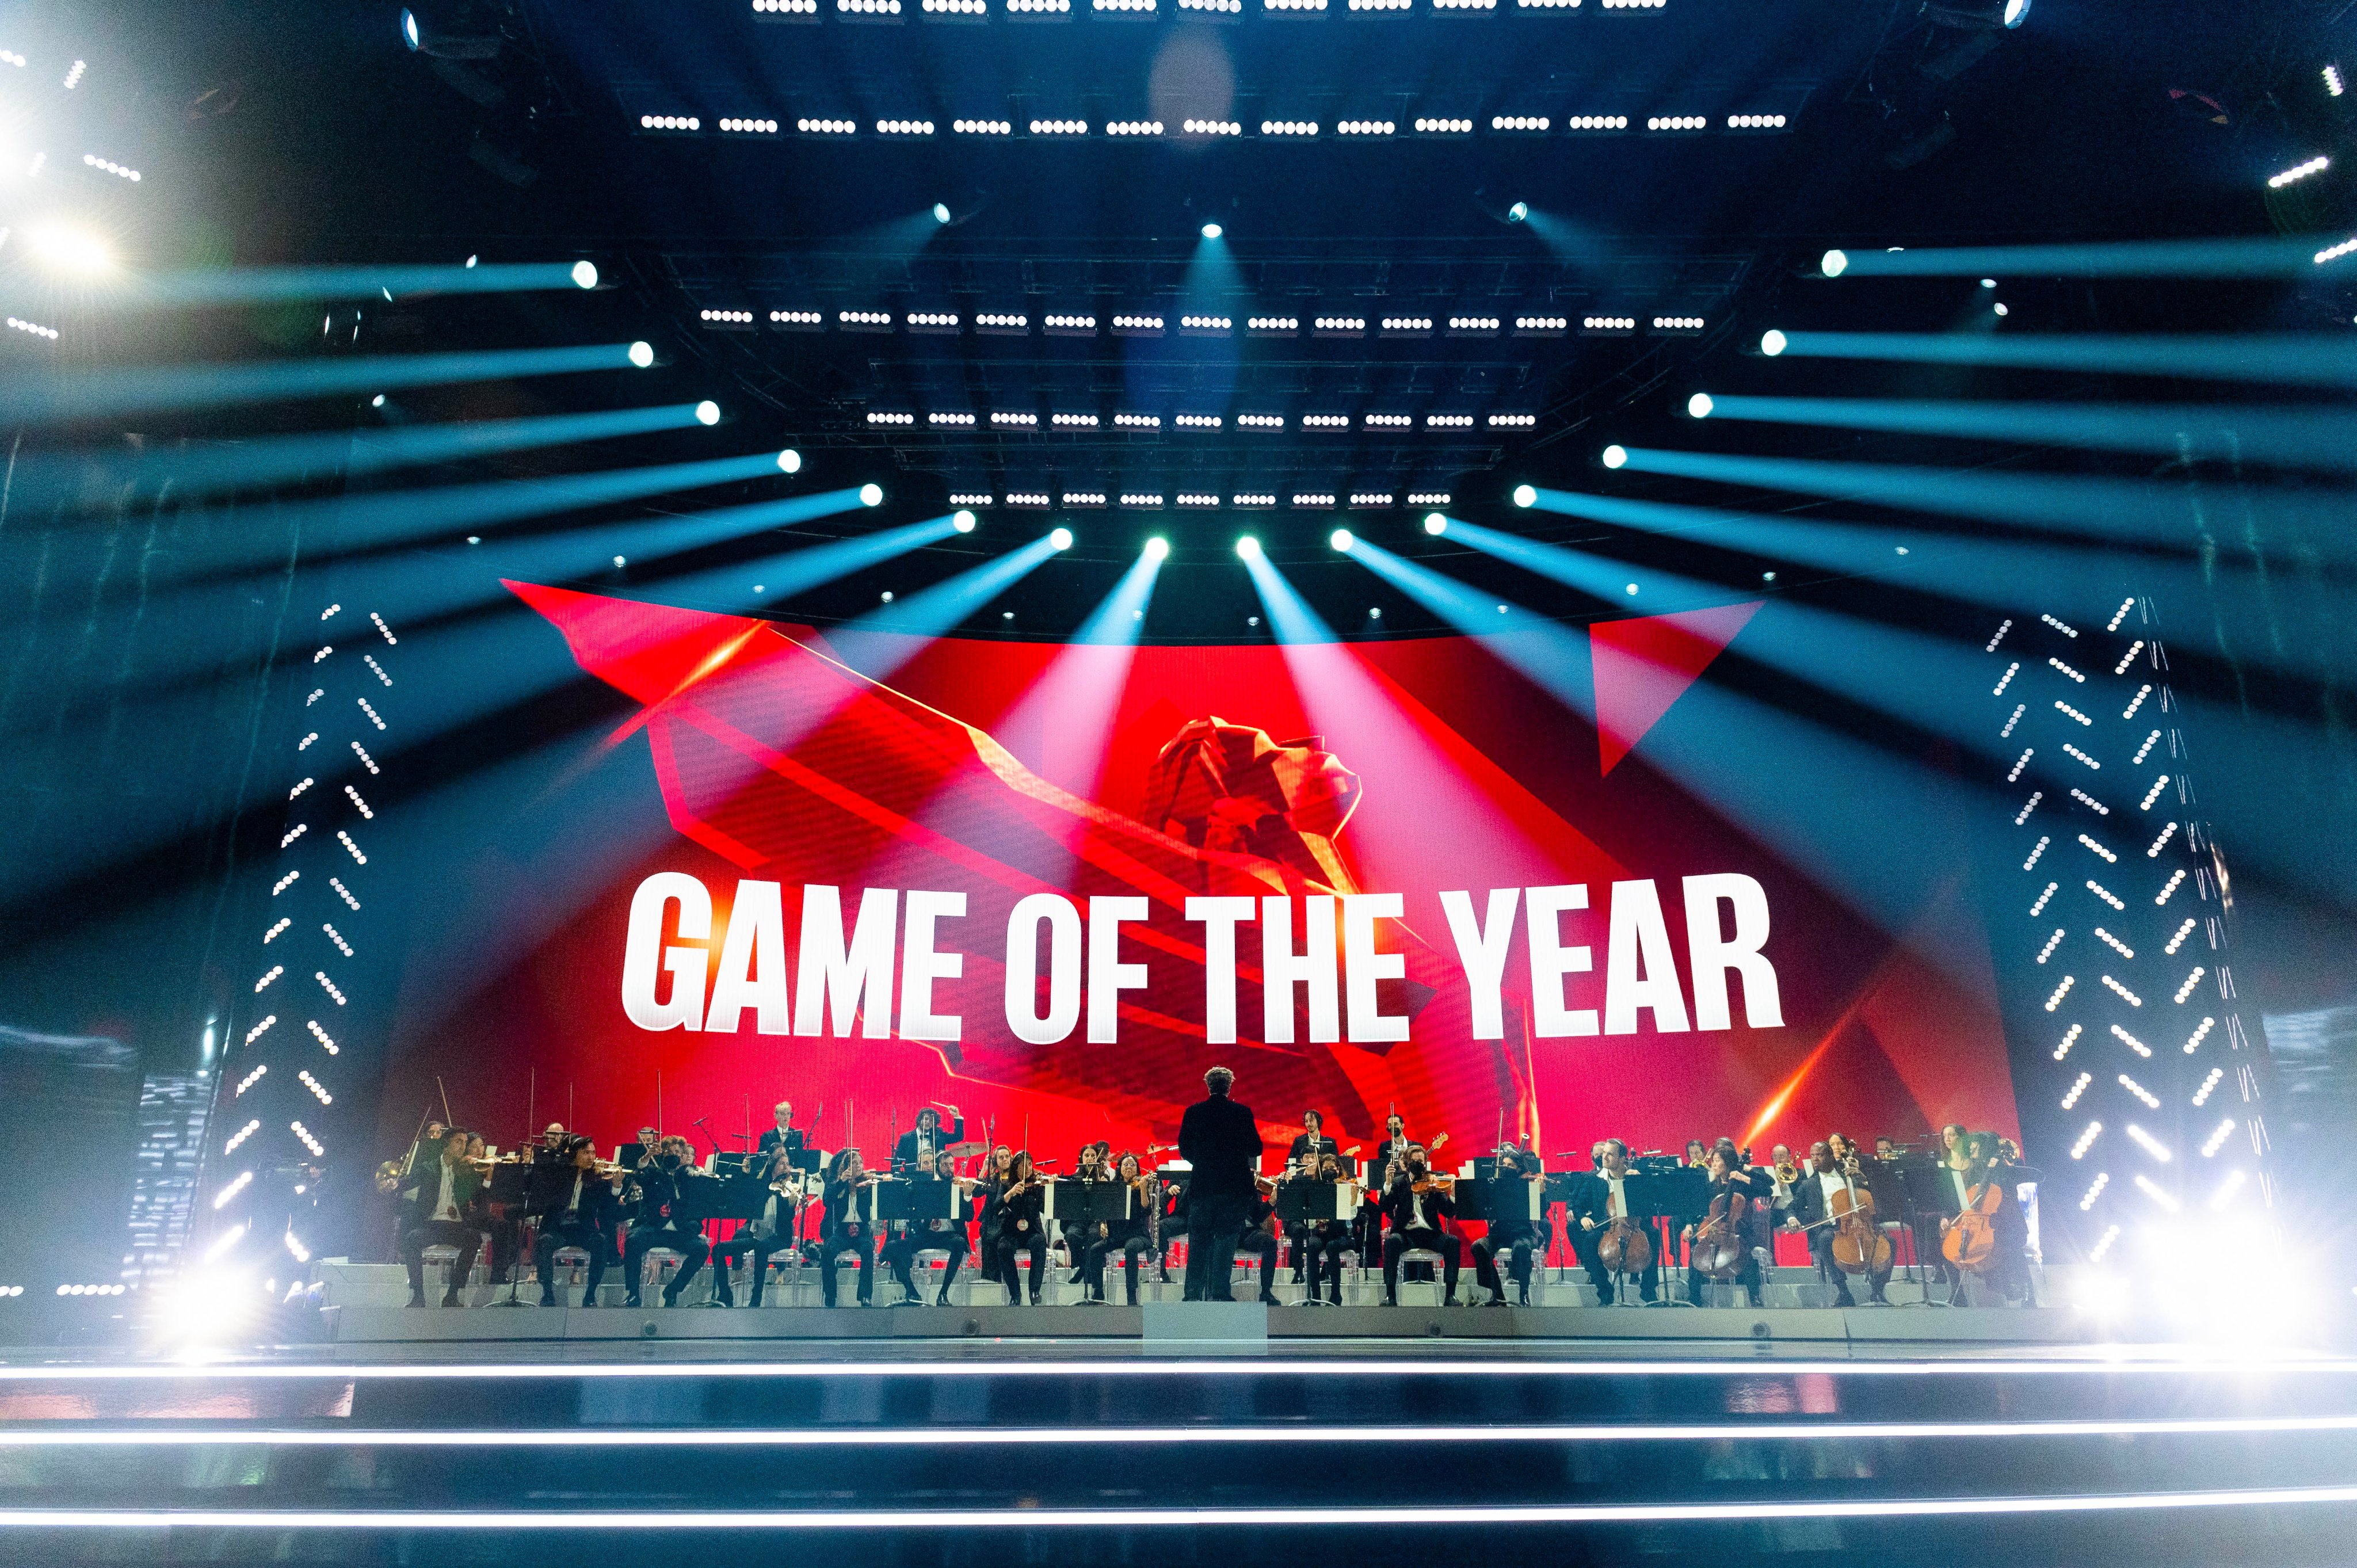 The Game Awards on X: Previous Game of the Year winners @TheGameAwards:  2014 - Dragon Age: Inquisition 2015 - The Witcher 3 2016 - Overwatch 2017 -  Breath of the Wild 2018 